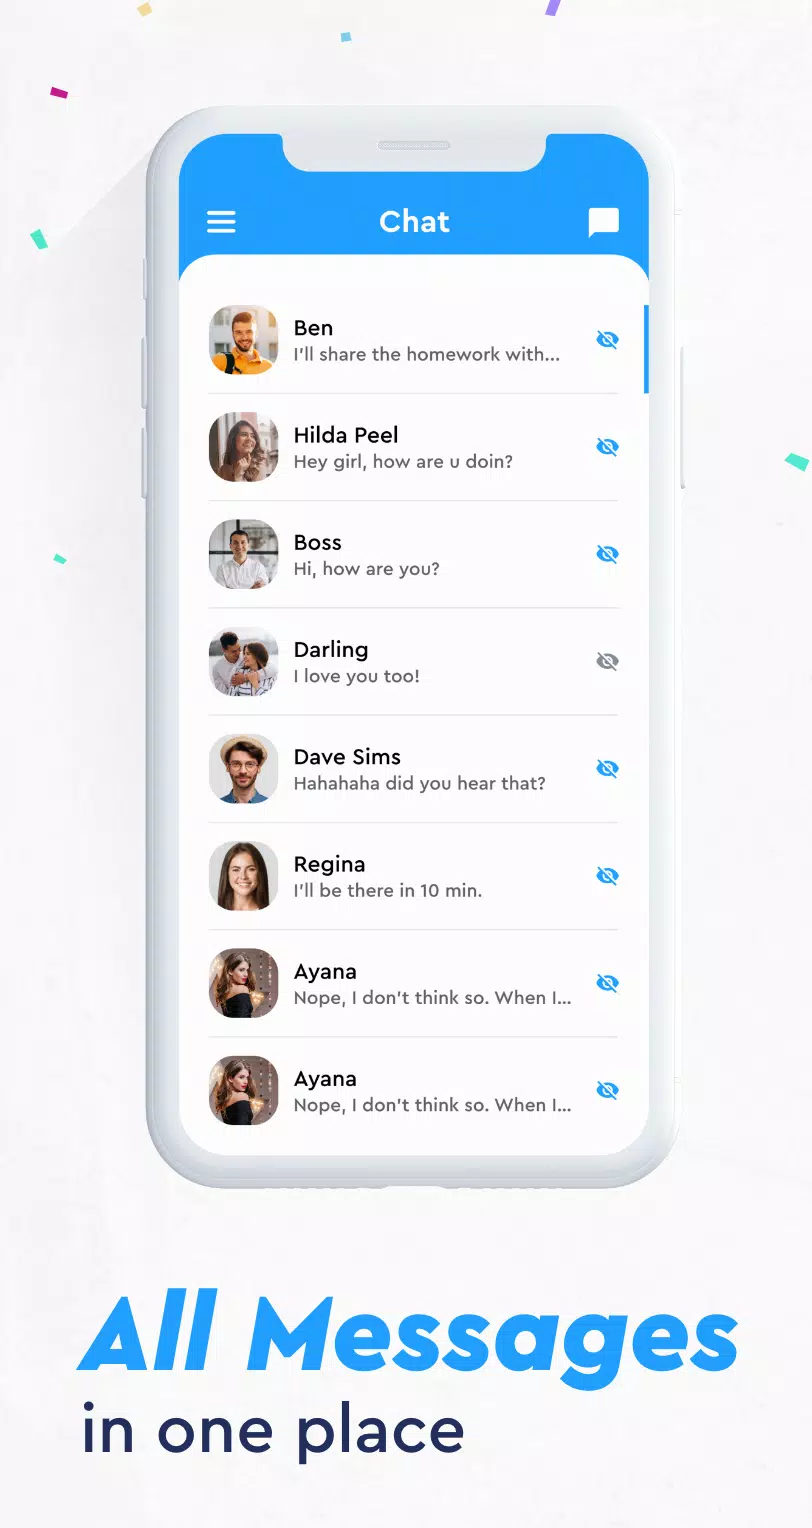 All in one chat app